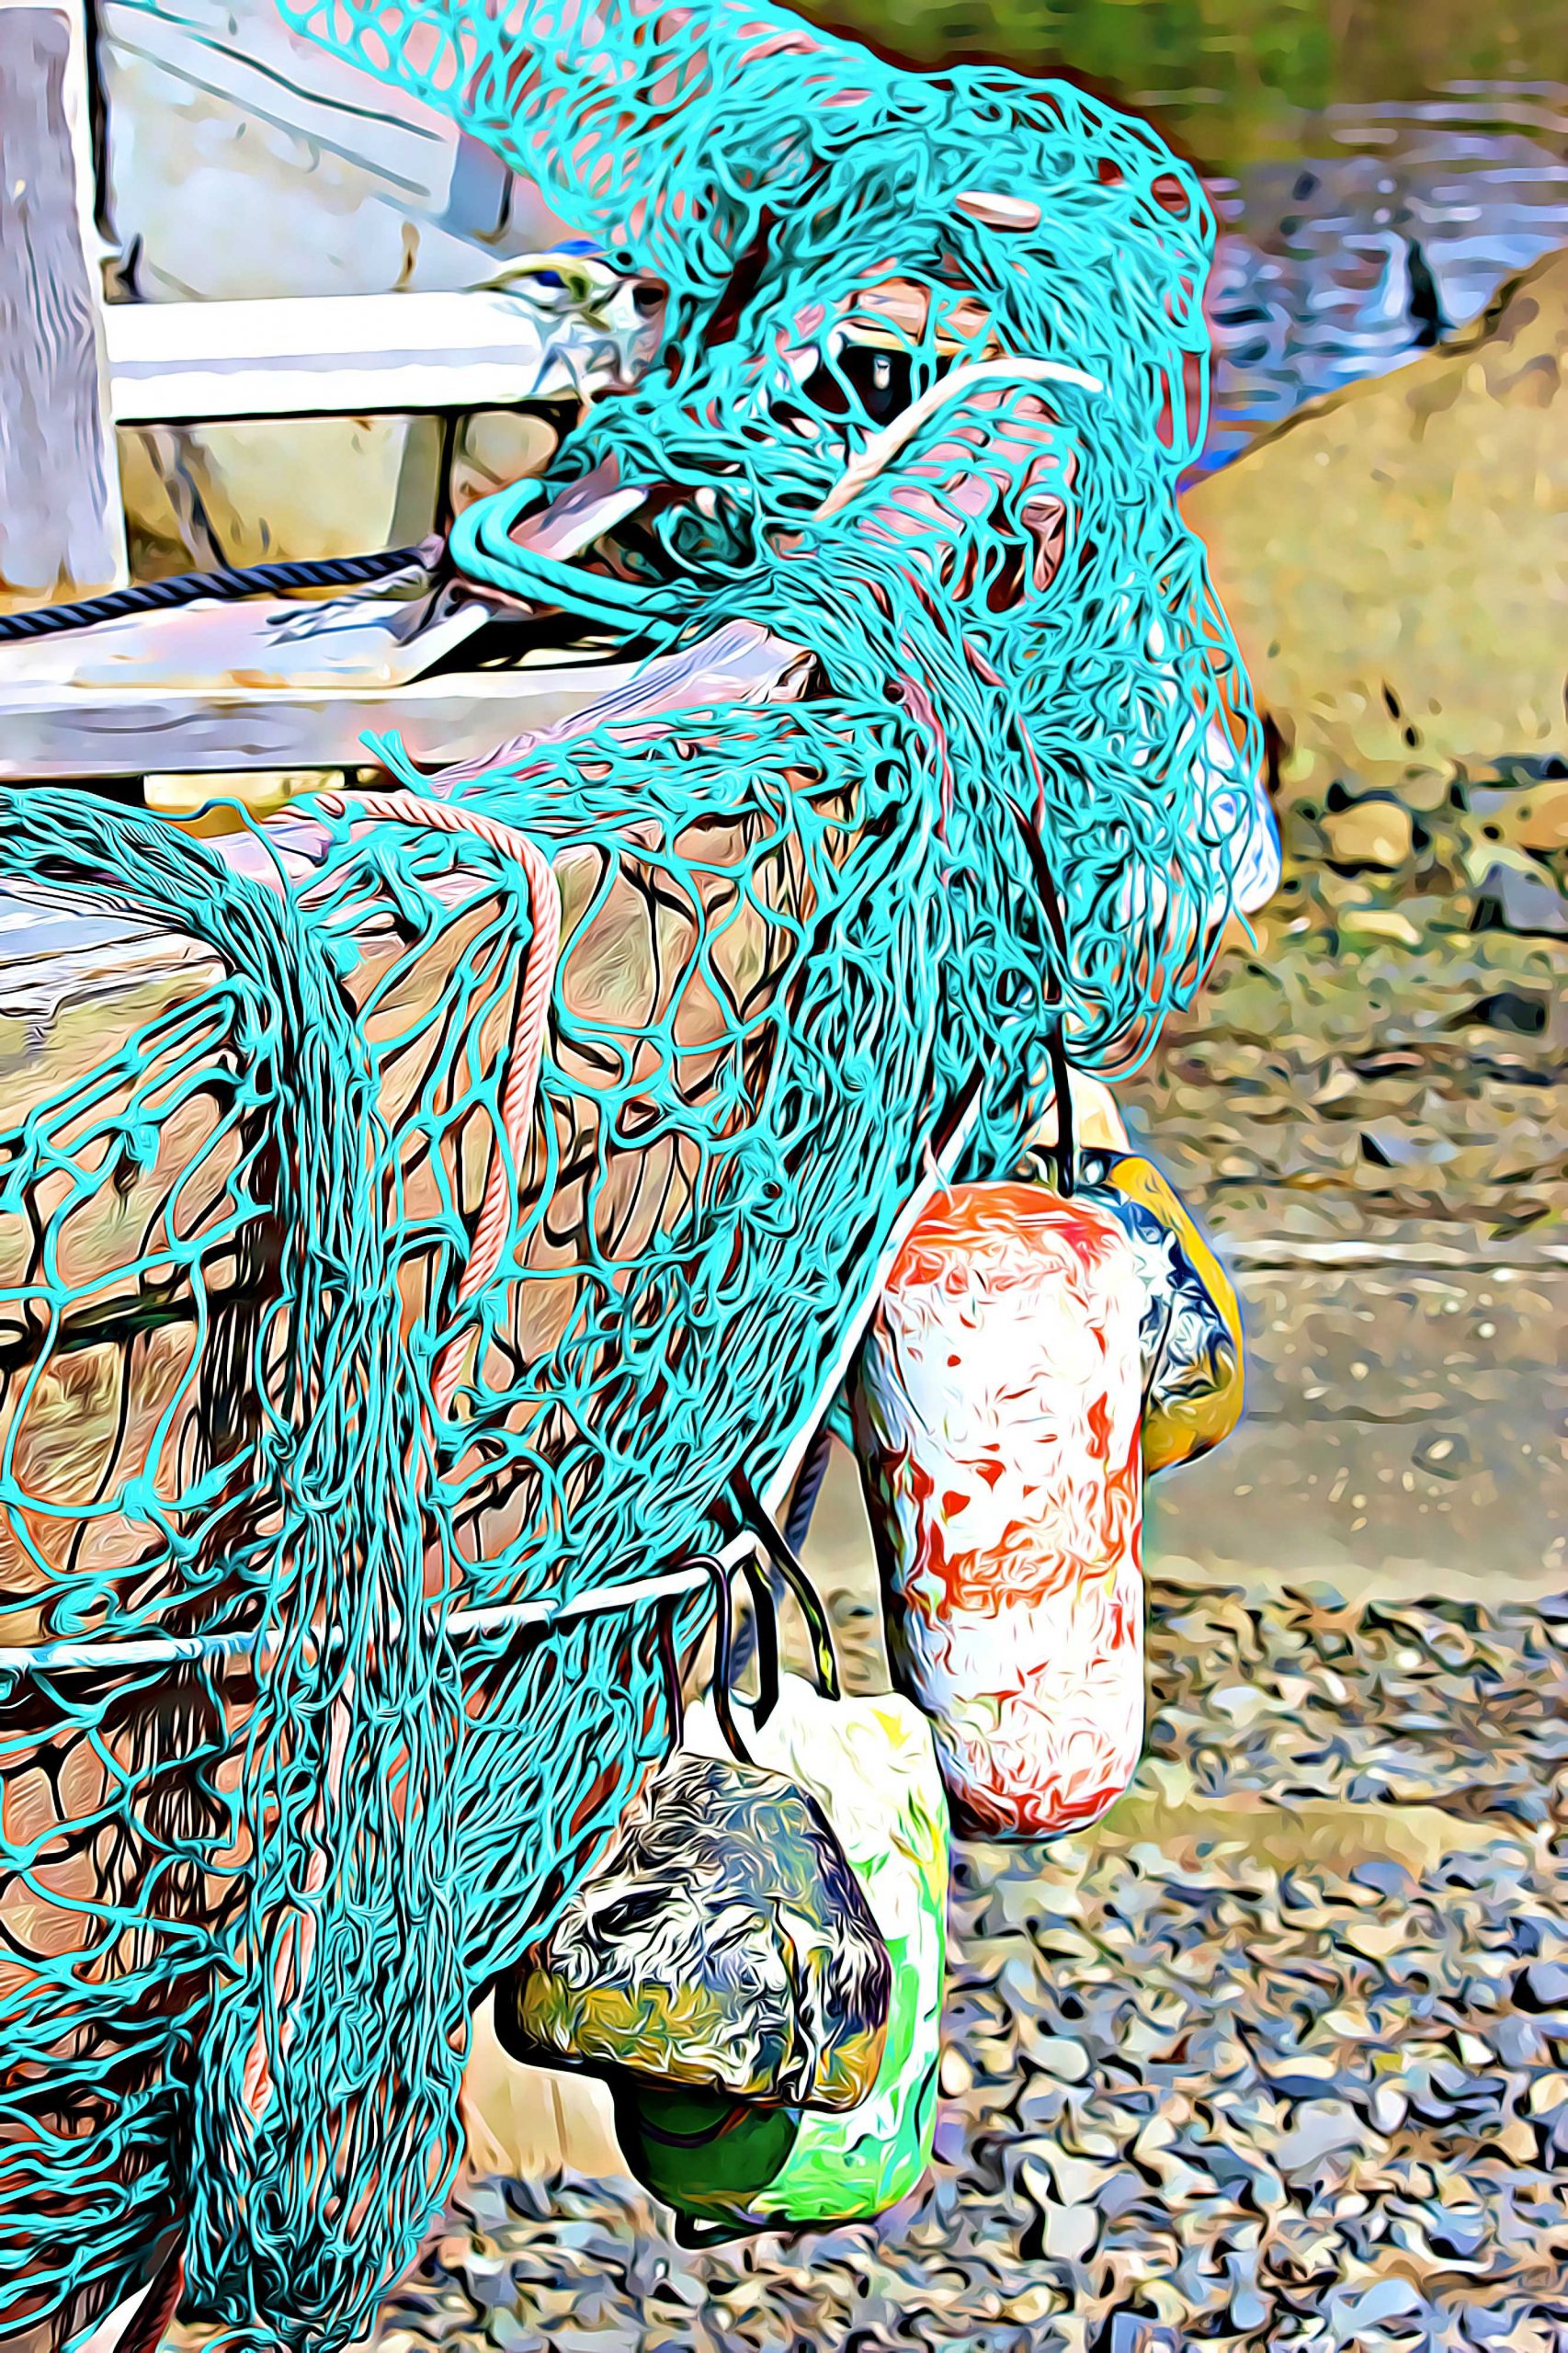 Fishing Boat with Green Net Photo Print